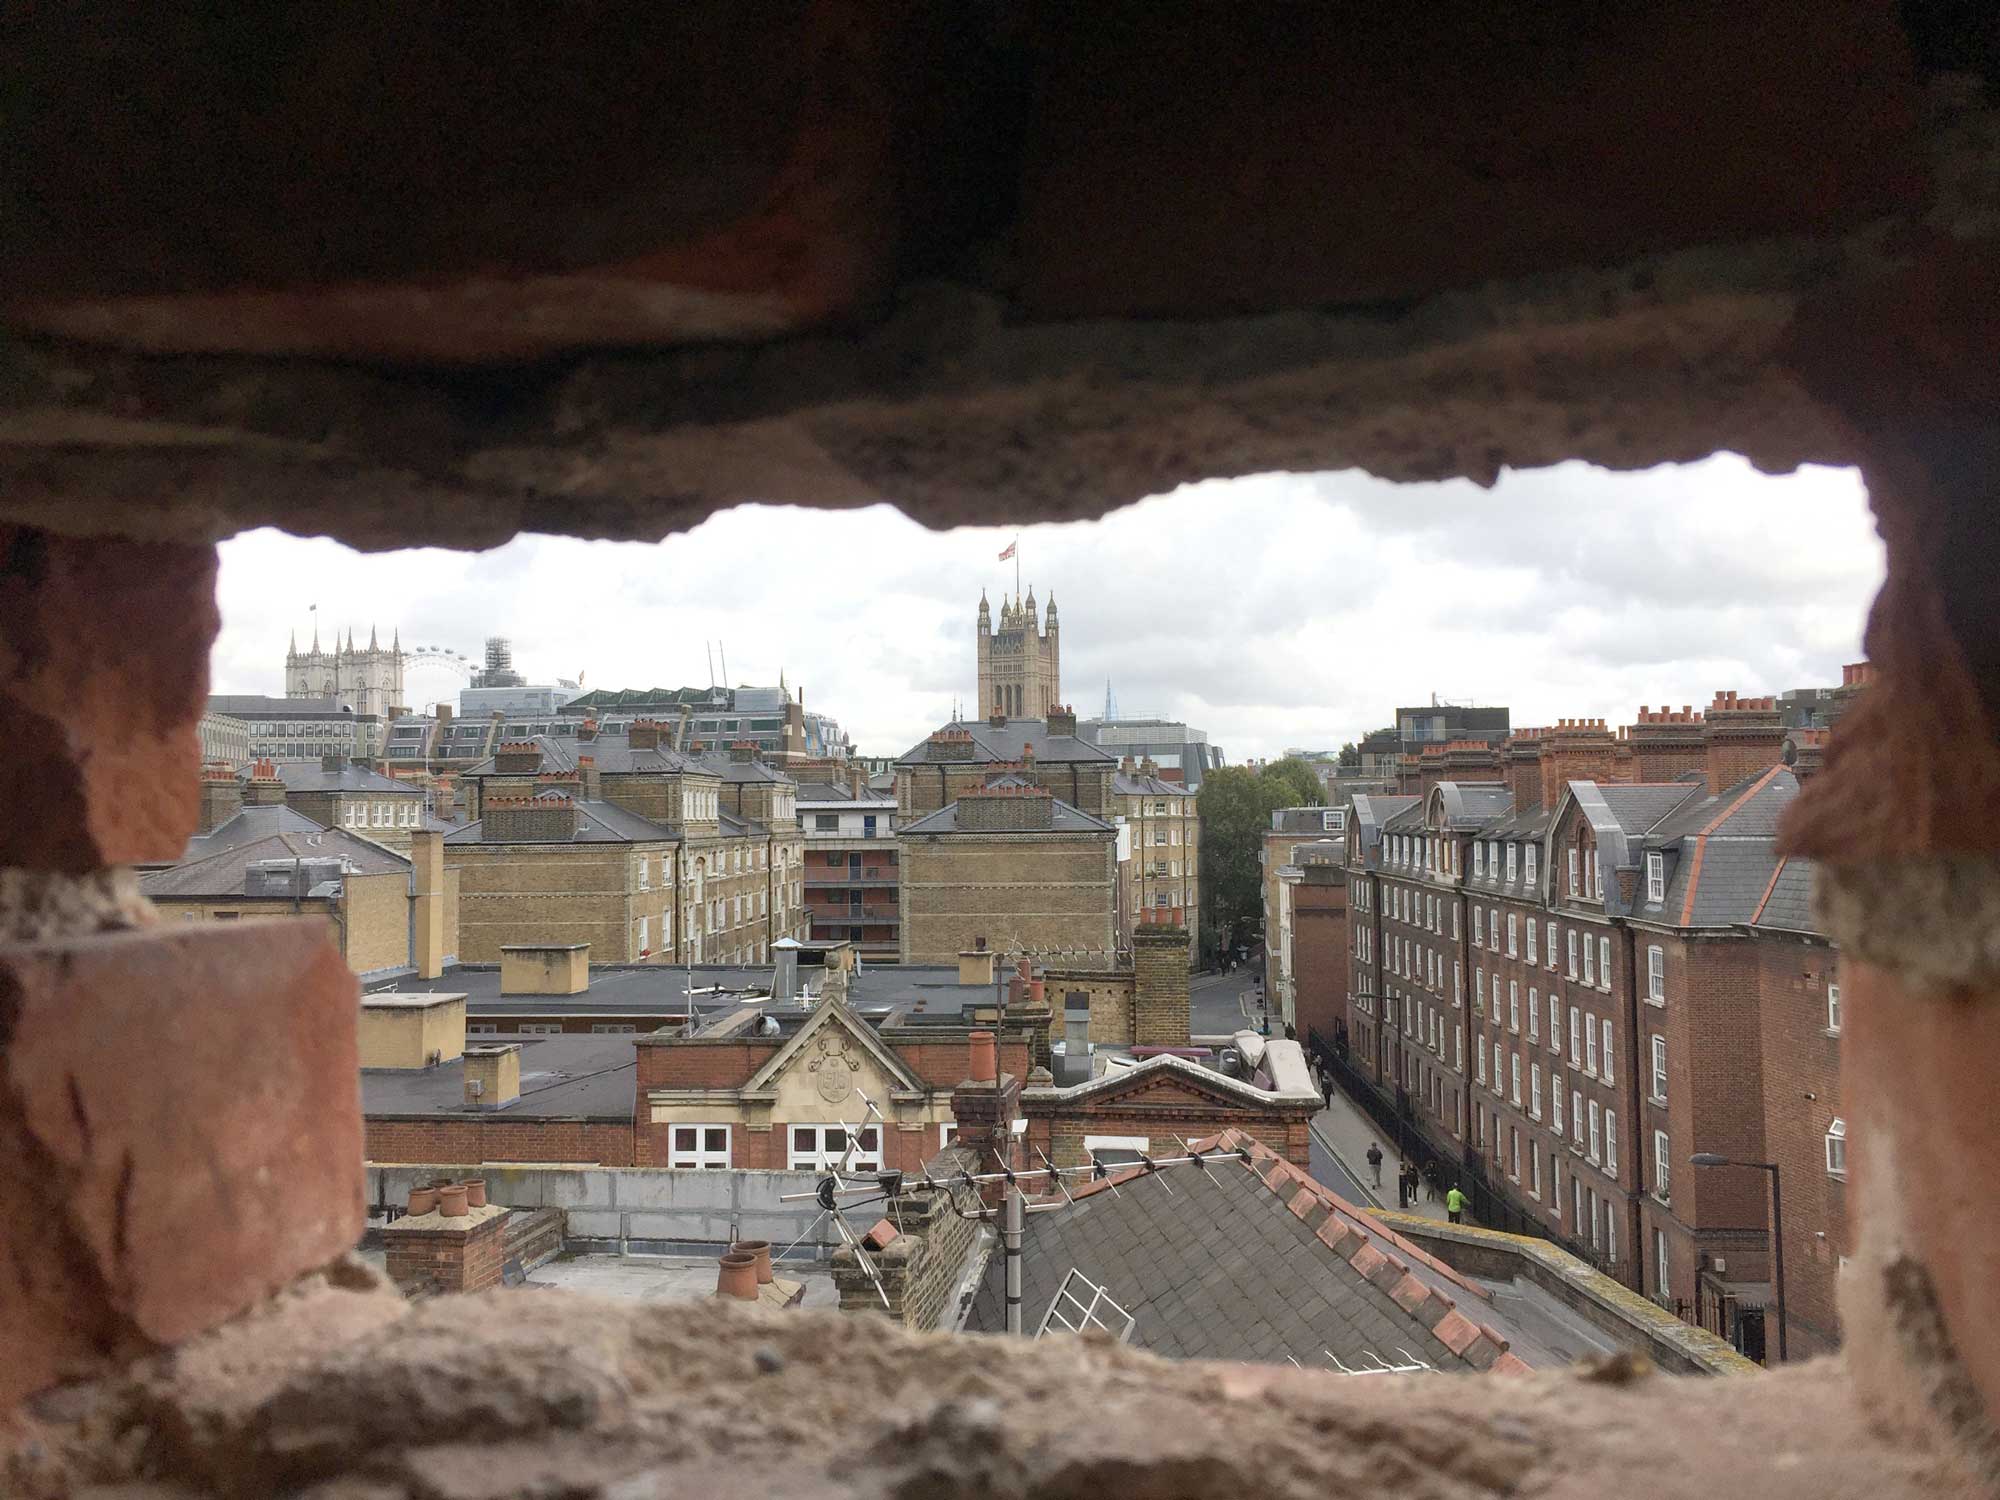 westminster-fire-station-openstudio-architects-view-from-hole